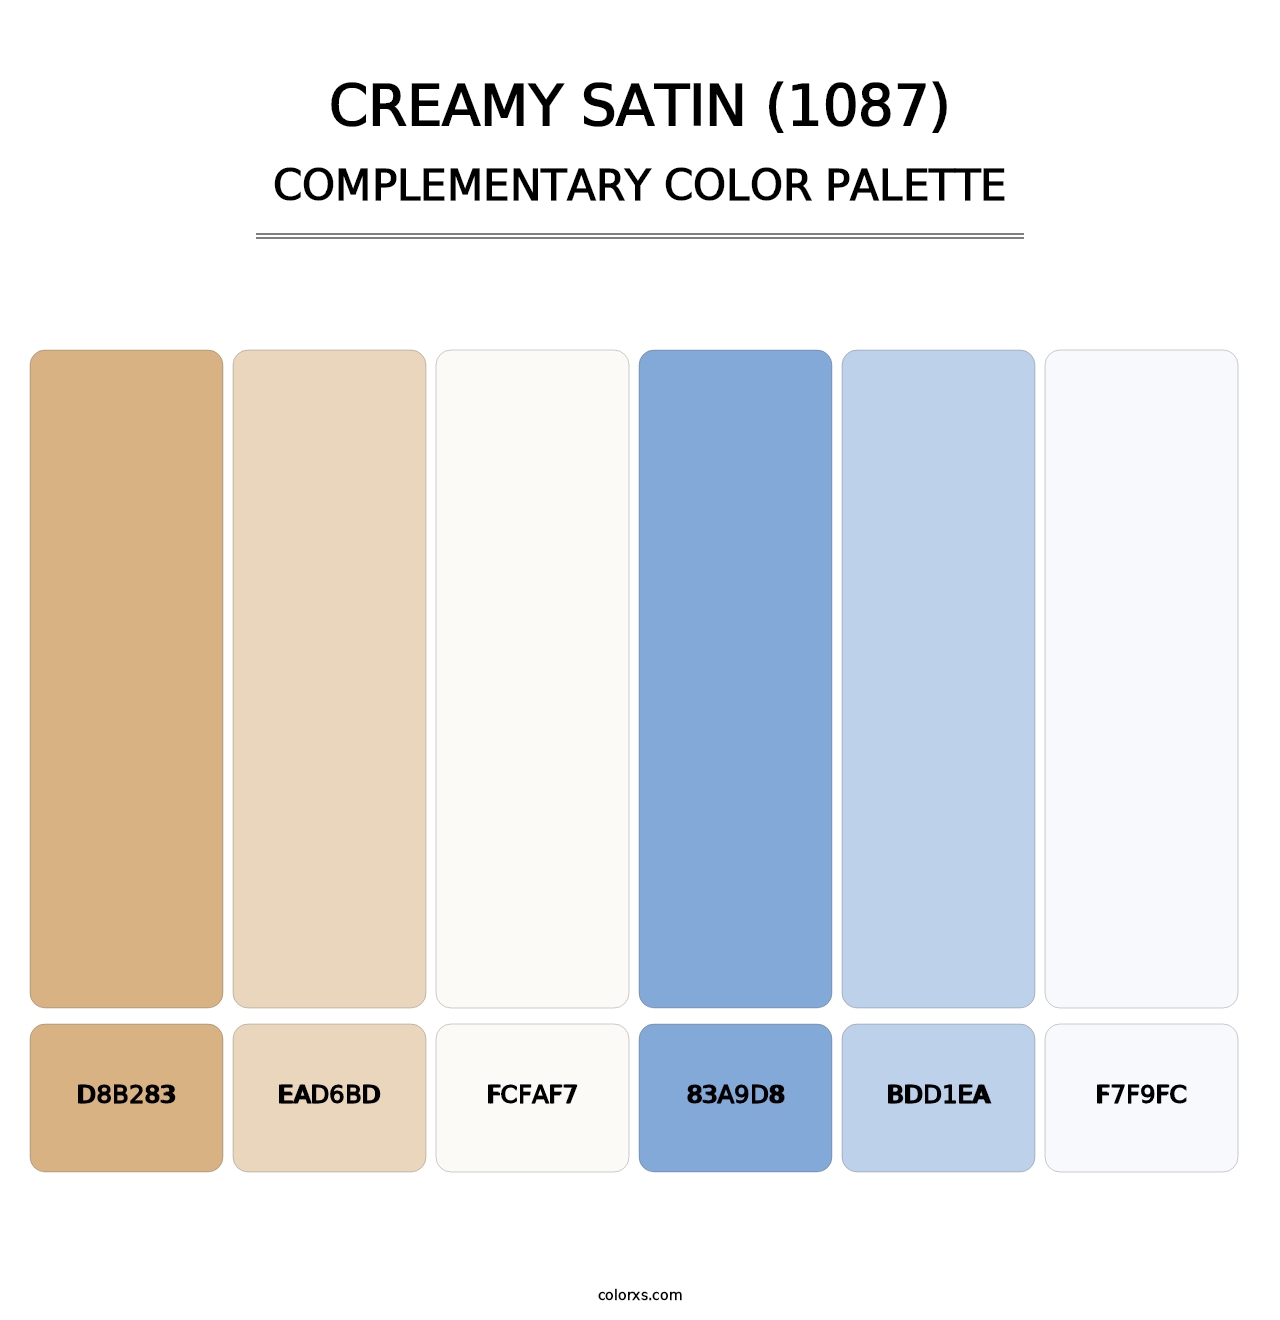 Creamy Satin (1087) - Complementary Color Palette